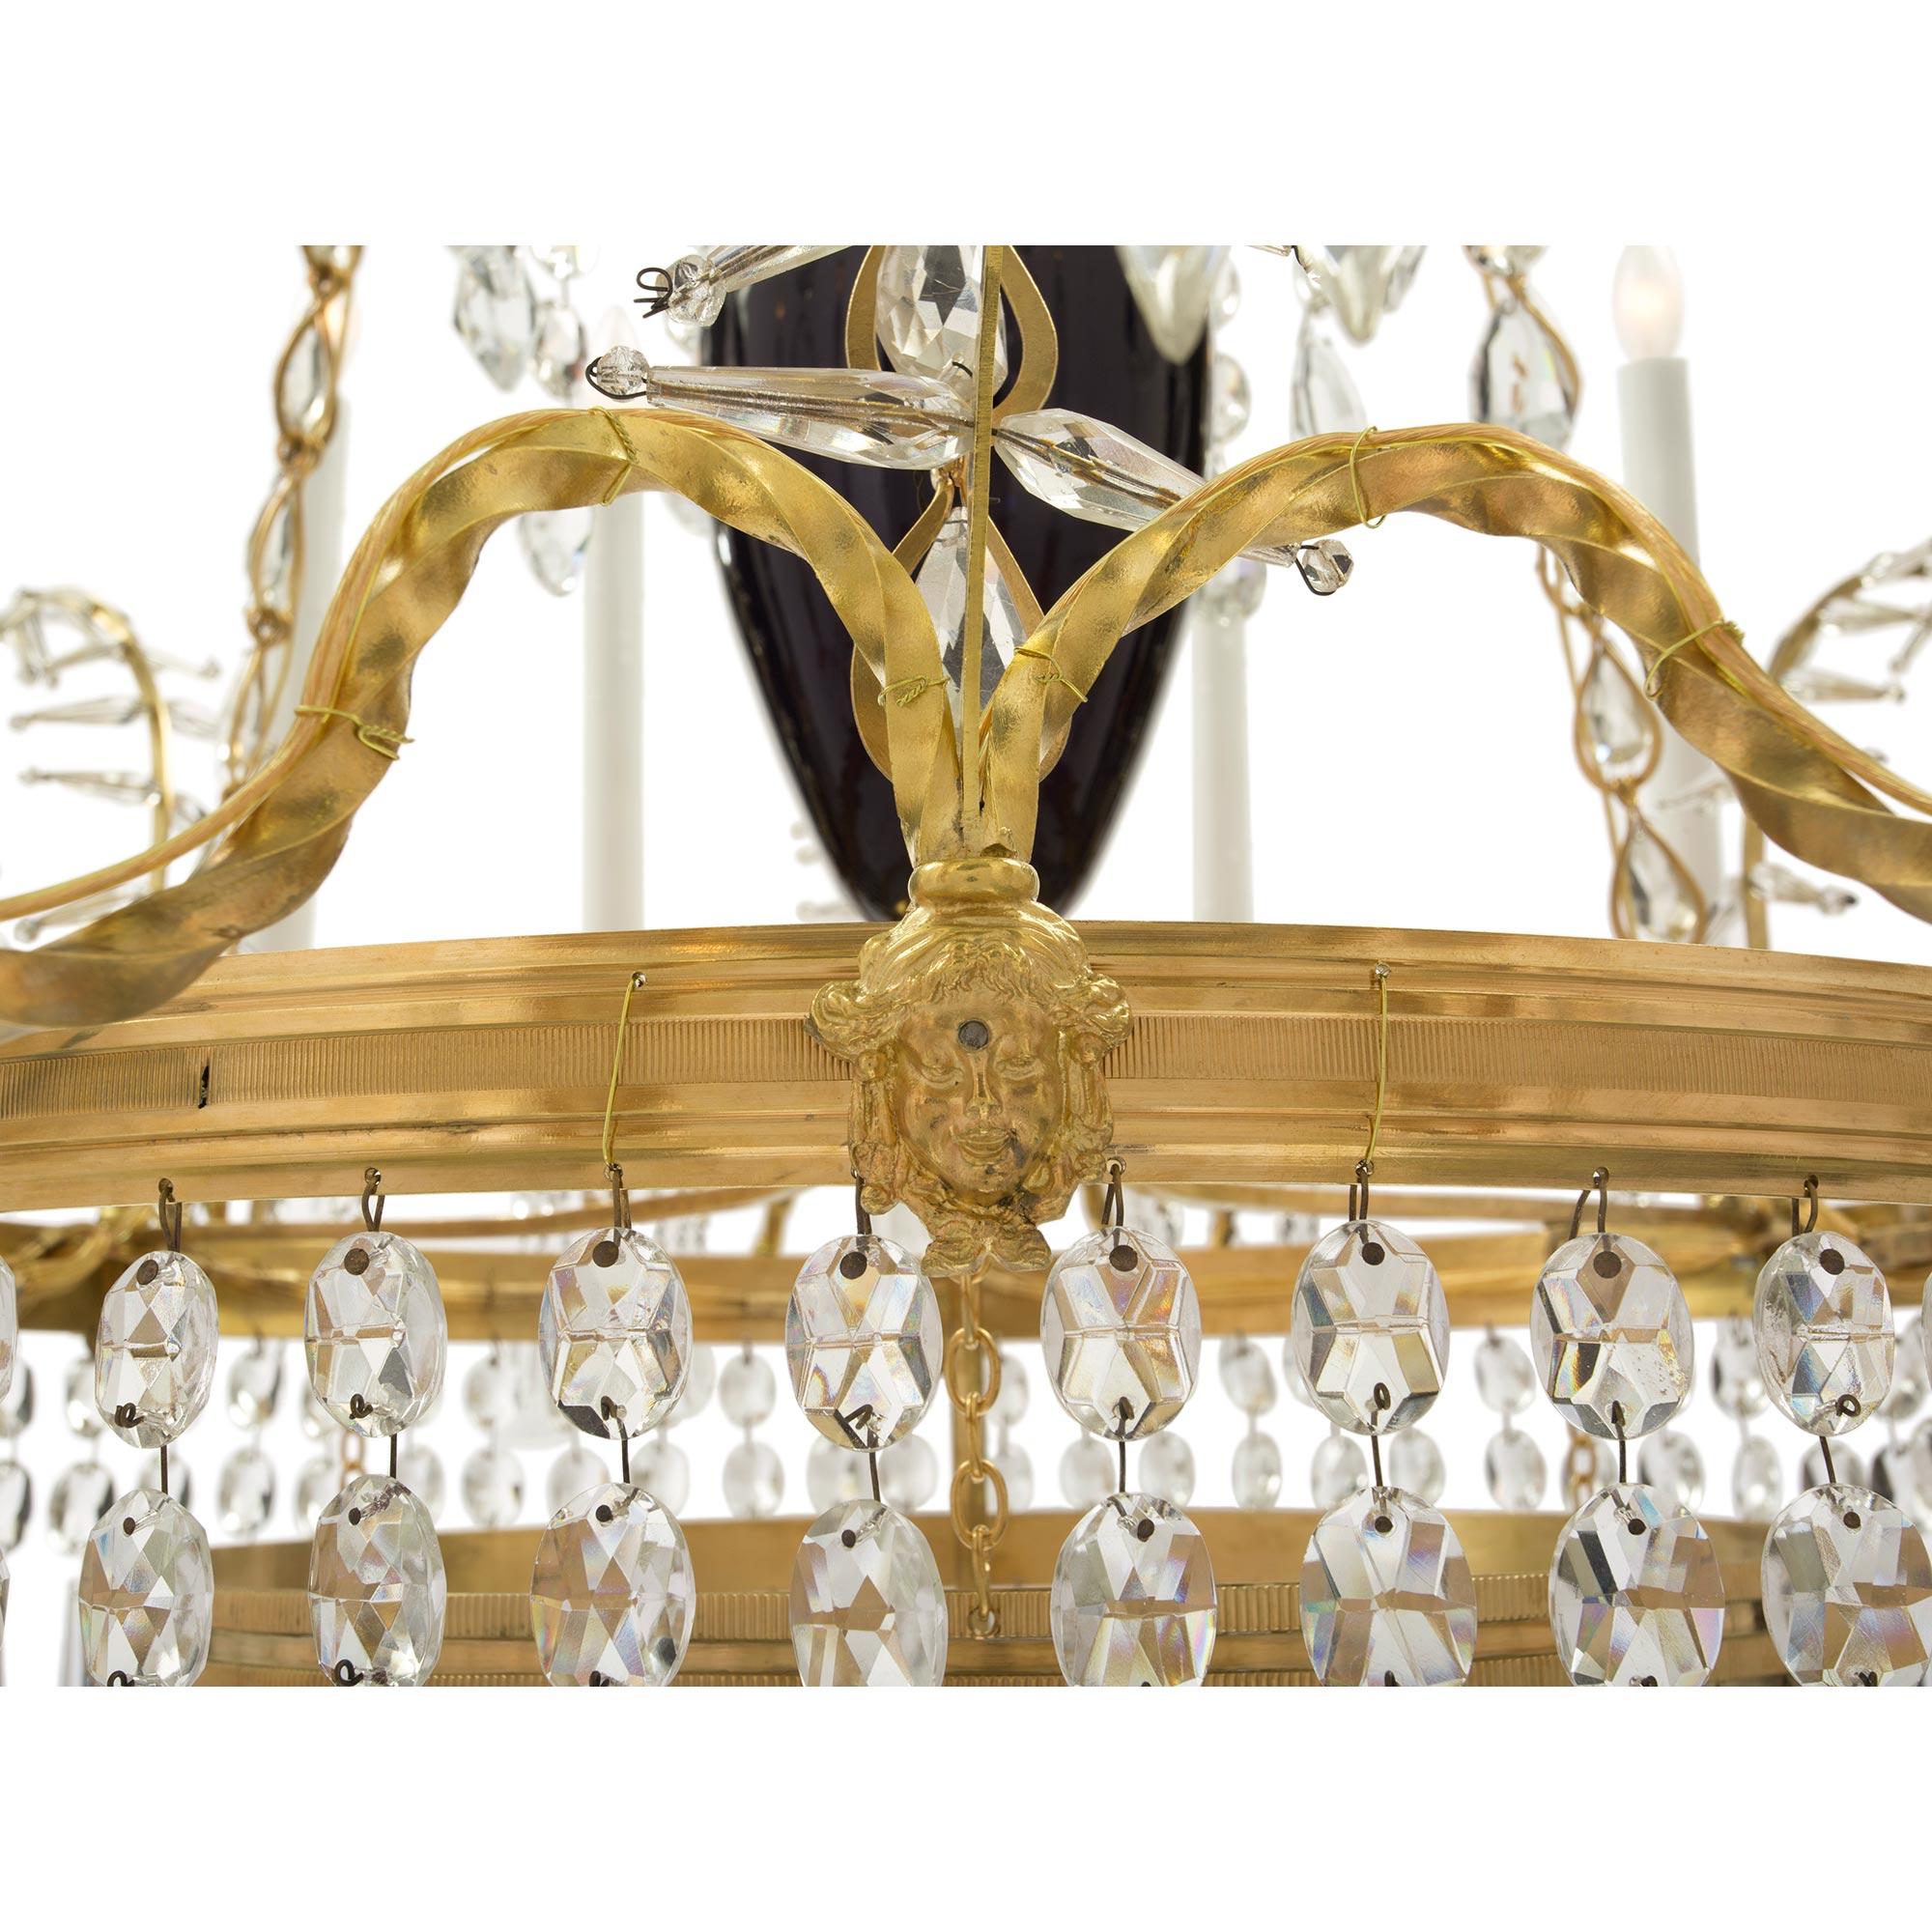 Russian 19th Century Neoclassical Style Glass, Crystal and Ormolu Chandelier For Sale 4